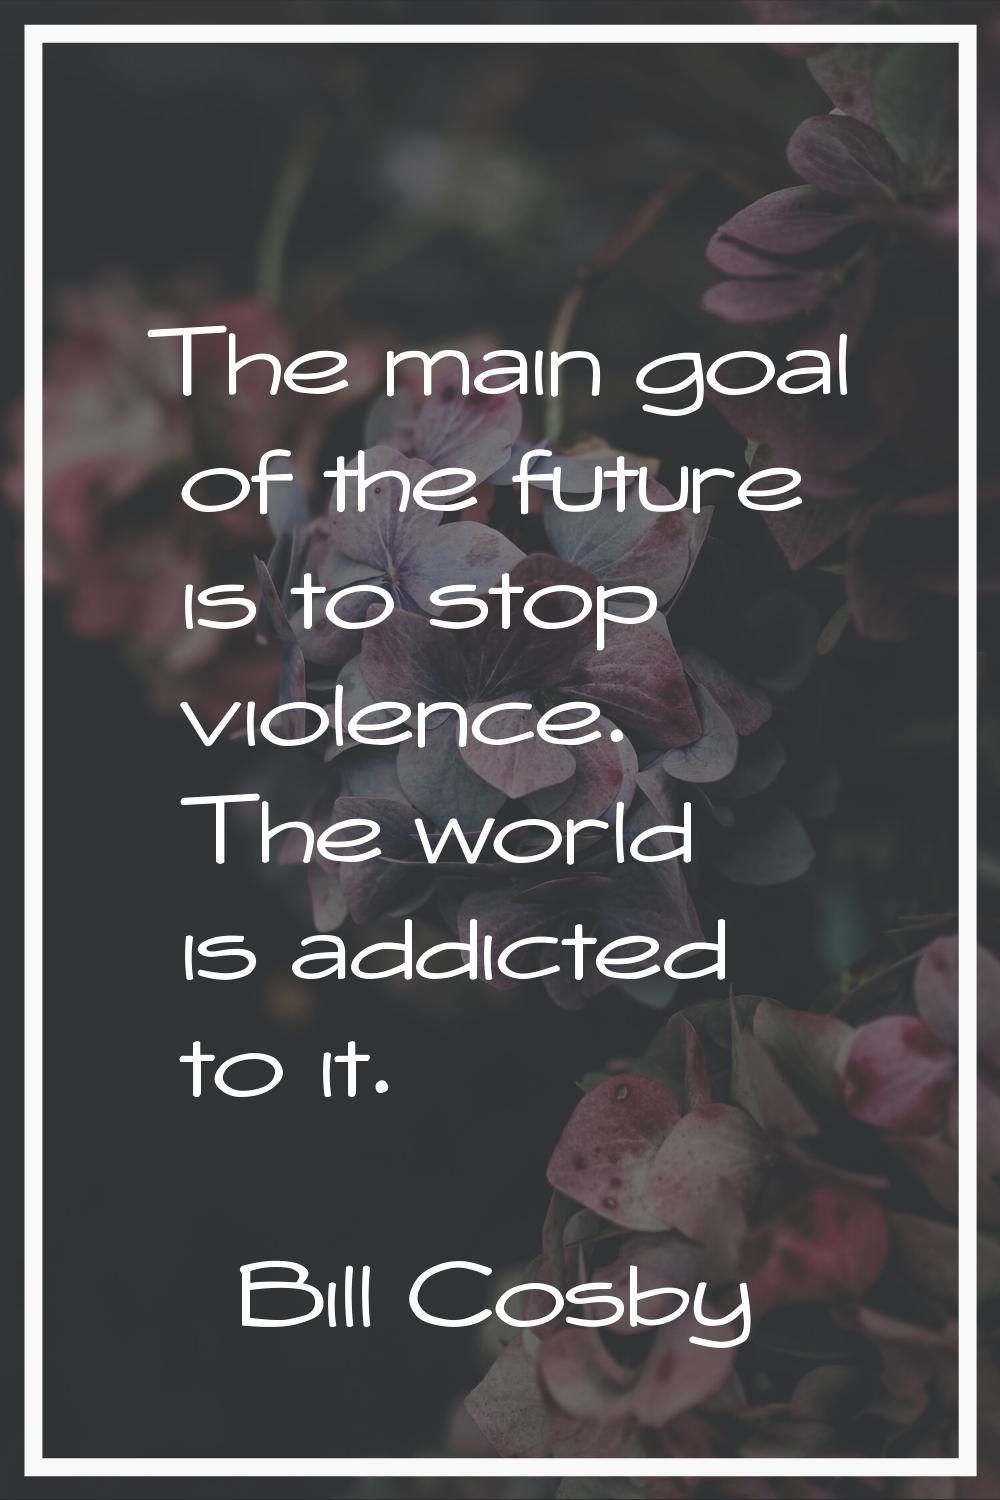 The main goal of the future is to stop violence. The world is addicted to it.